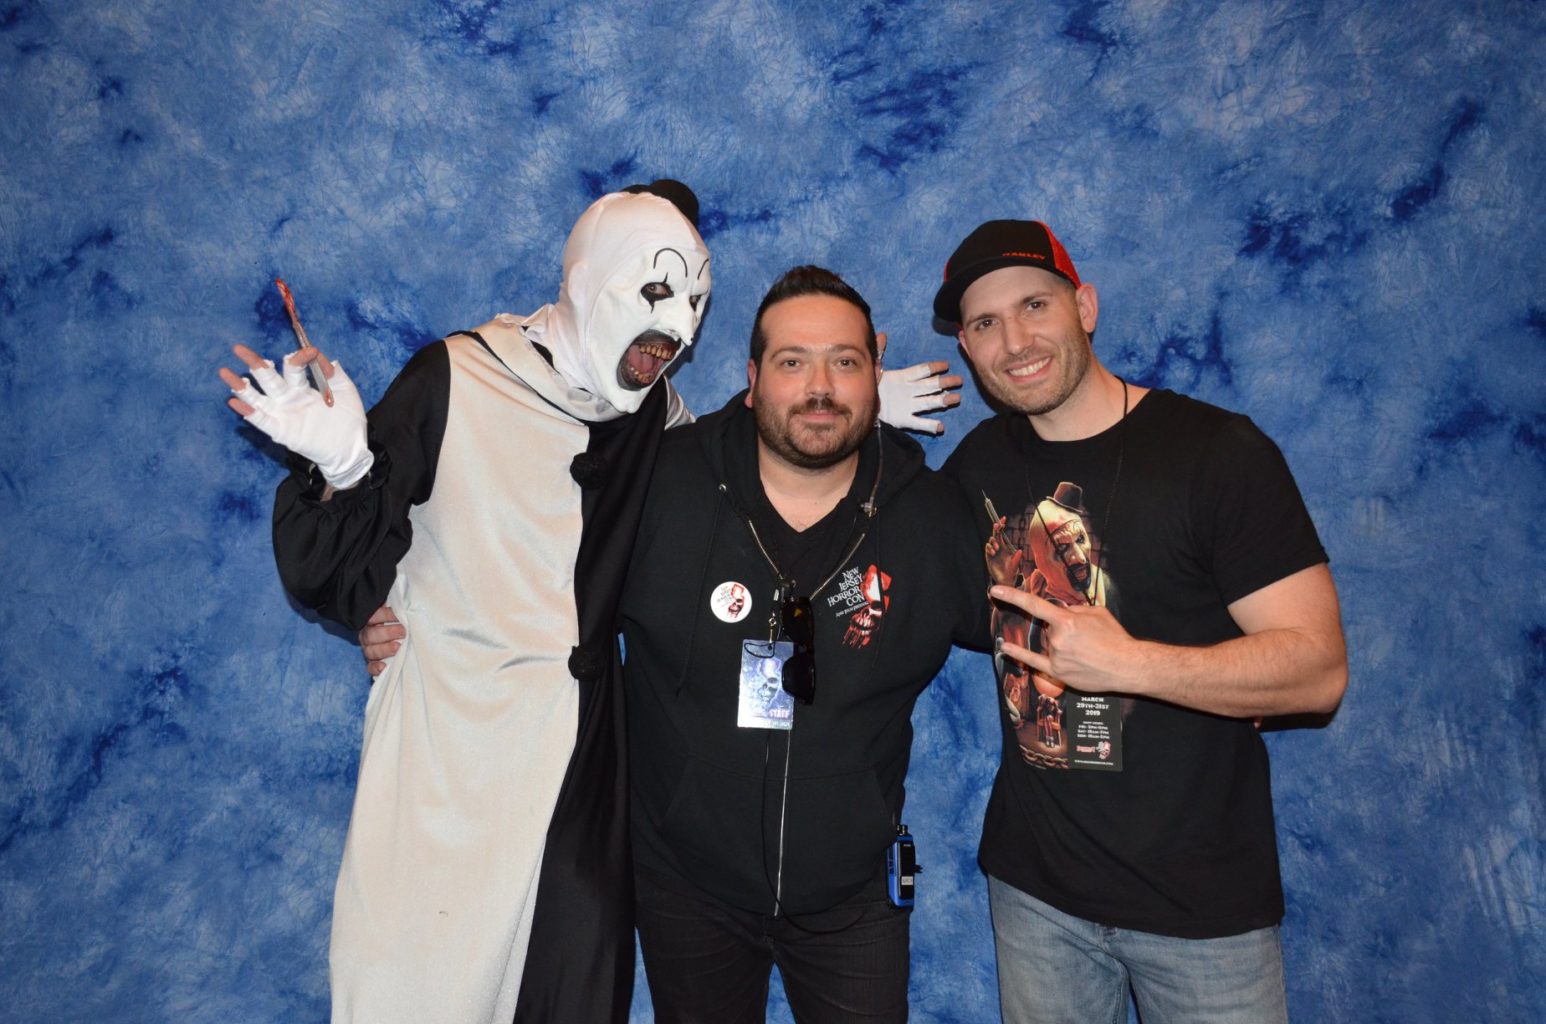 New Jersey Horror Con and Film Festival A True State of Horror